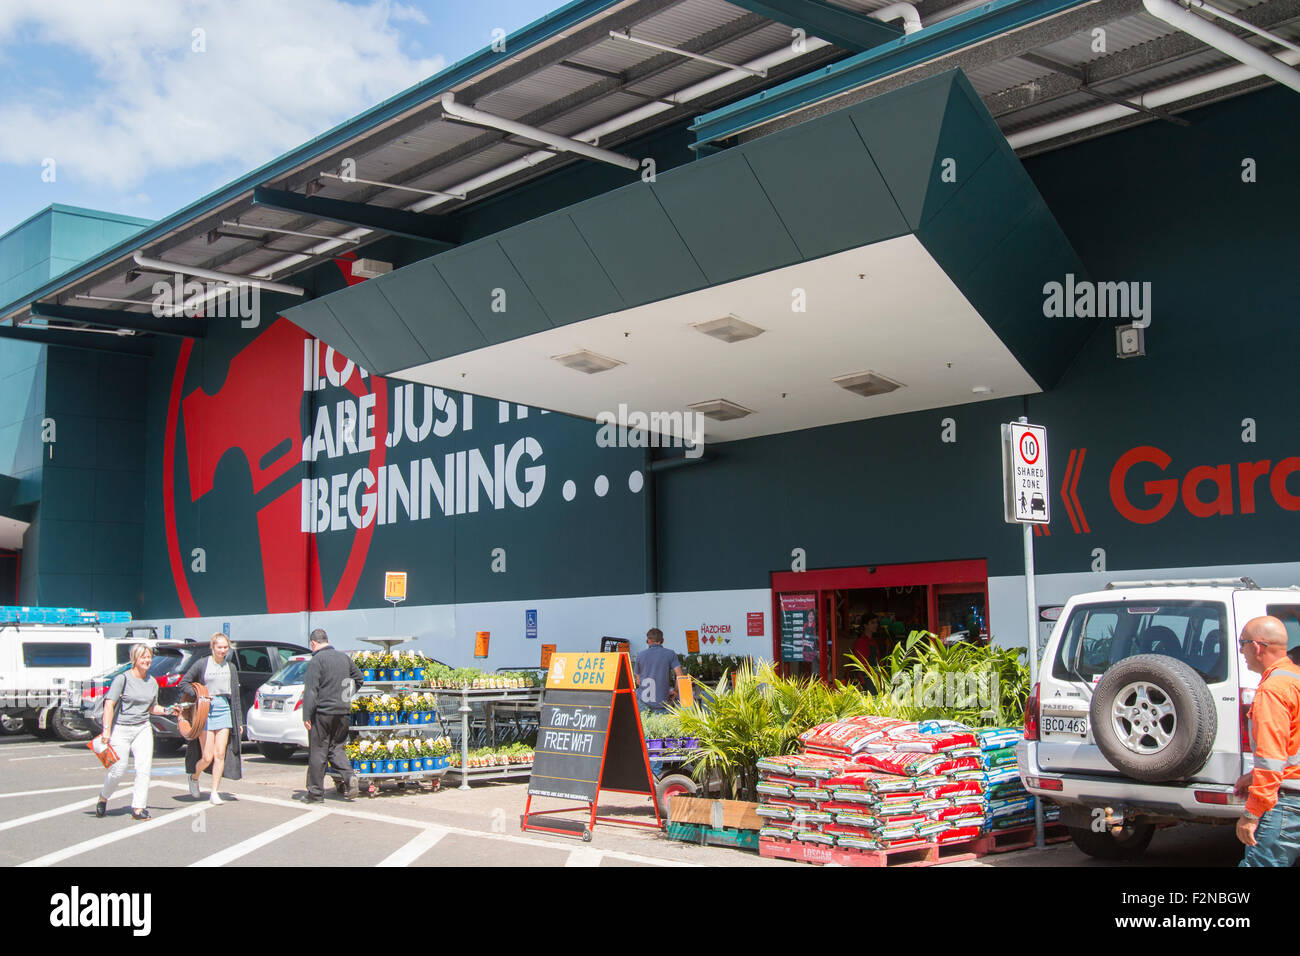 Bunnings DIY hardware store, a chain by Wesfarmers in australia, bunnings slogan lowest prices are just the beginning Stock Photo - Alamy